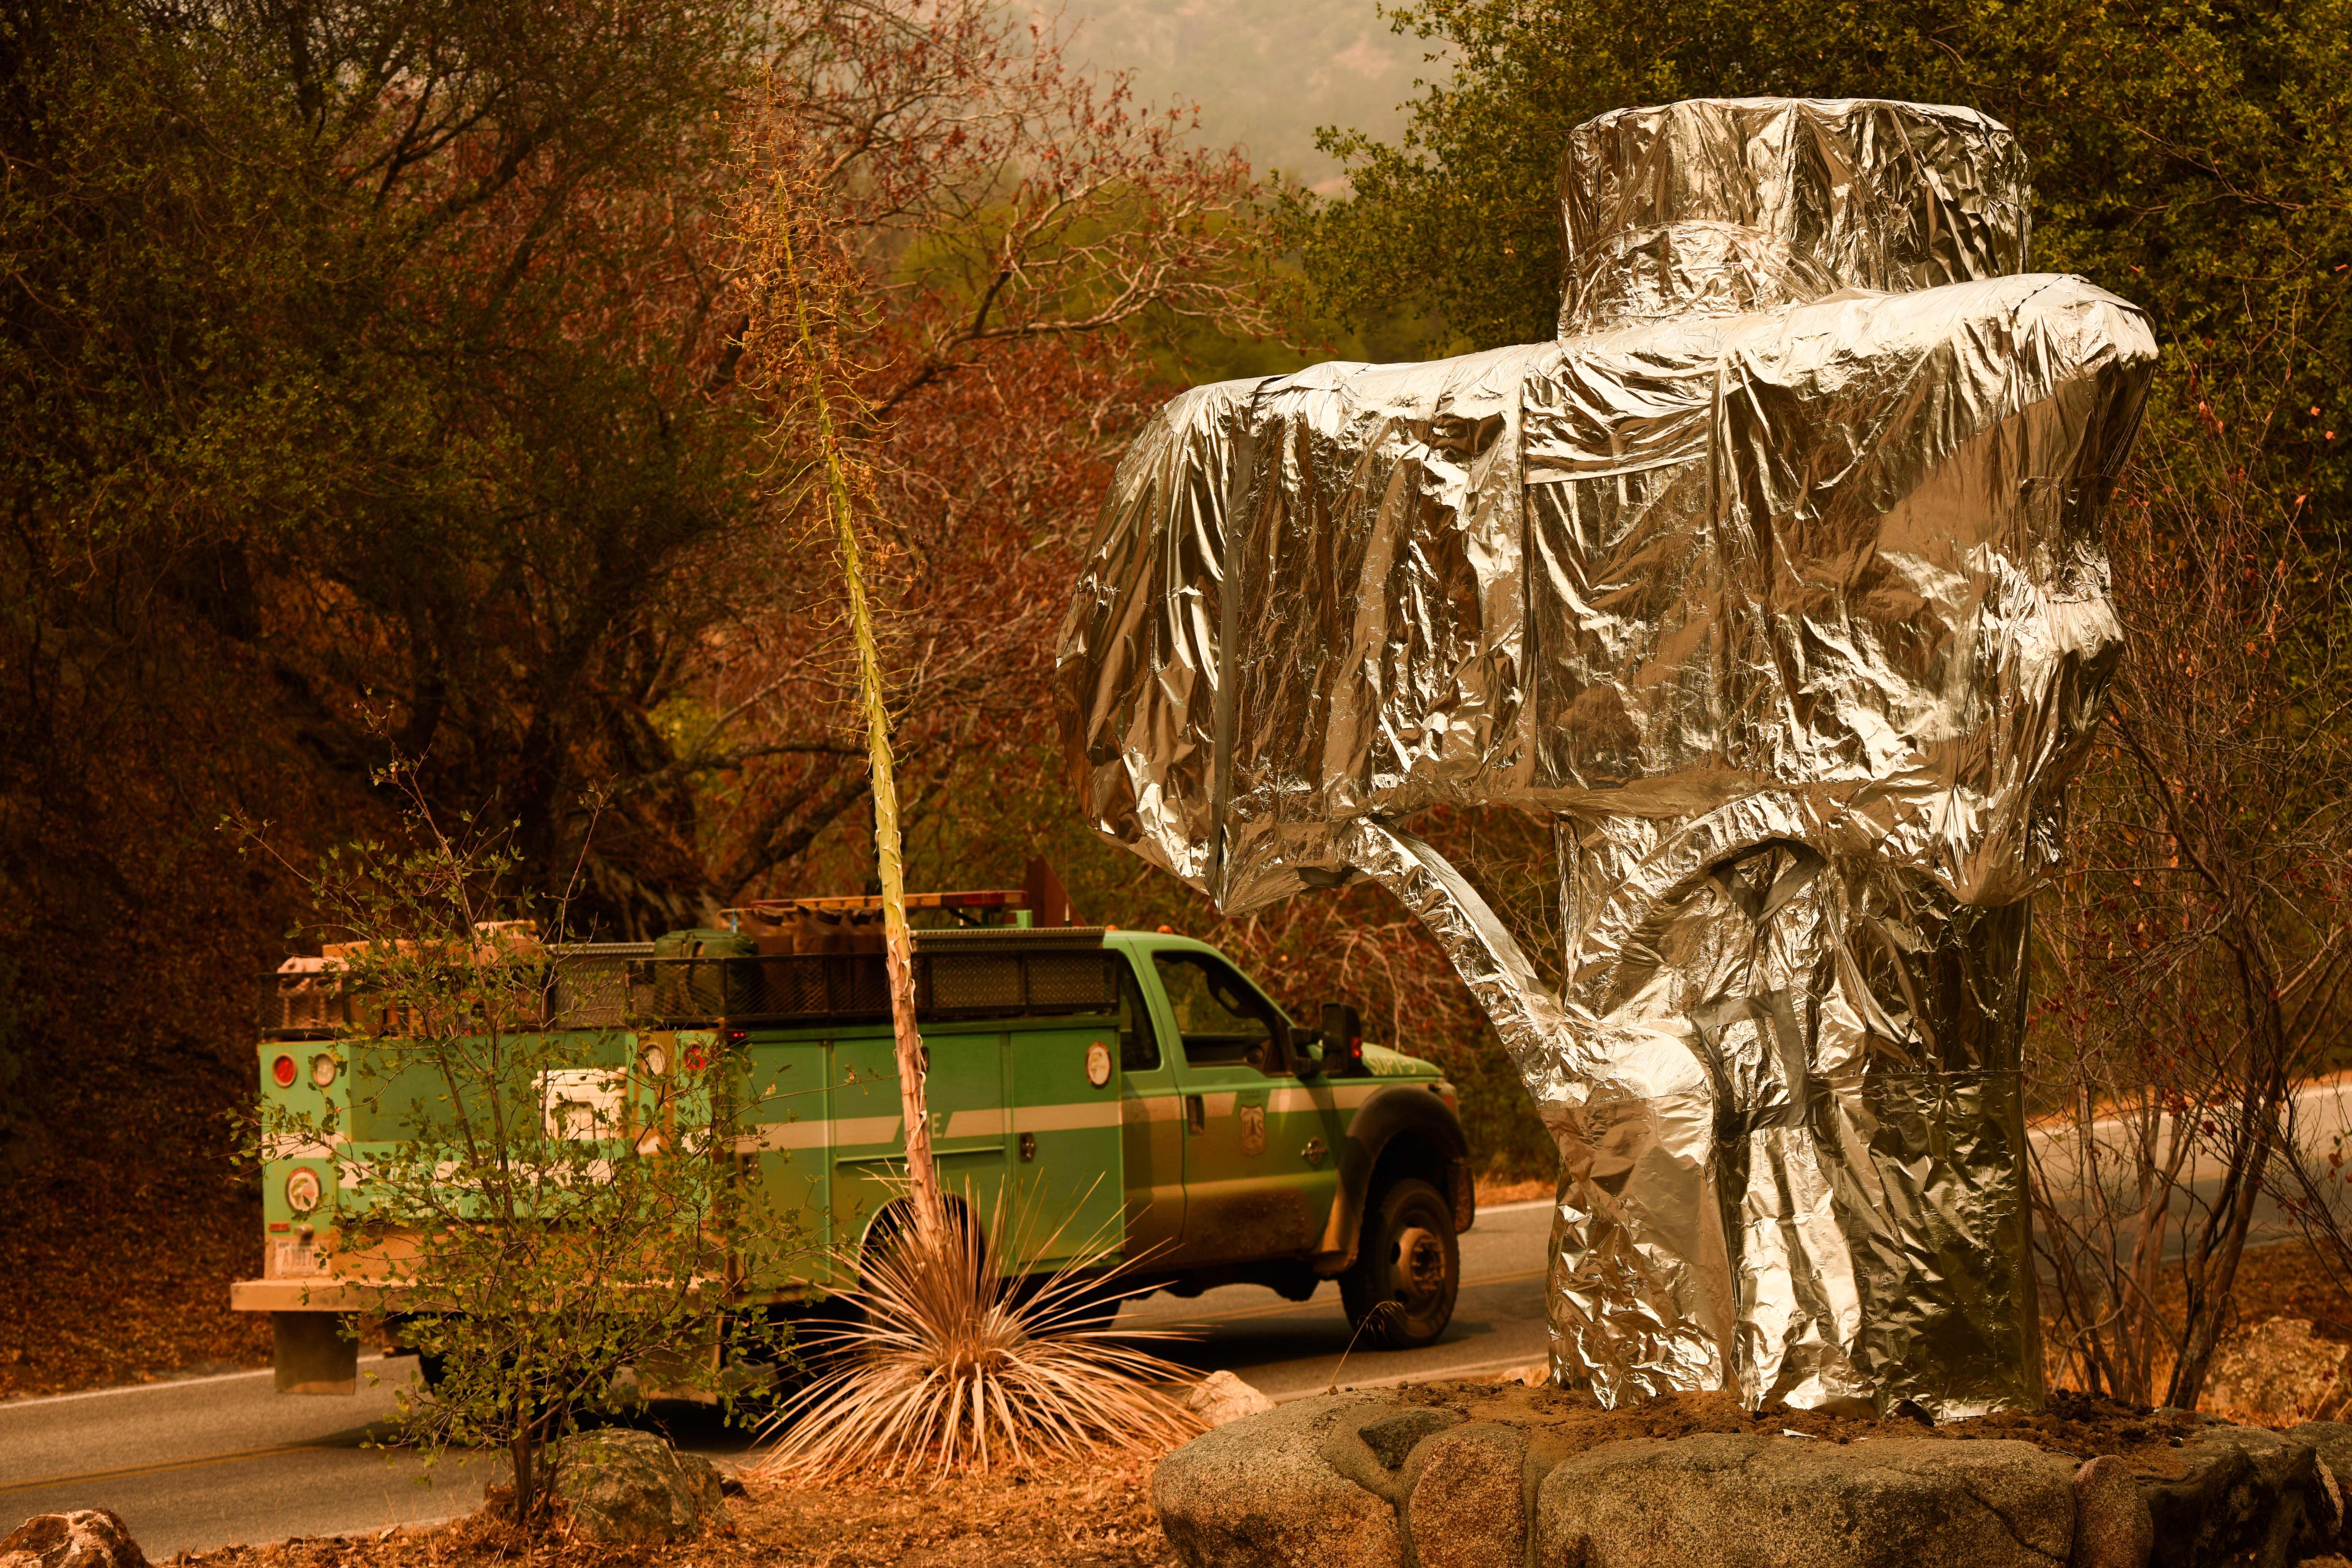 A US Forest Service vehicle drives past the Sequoia National Park historic park entrance sign wrapped in fire resistant foil in California